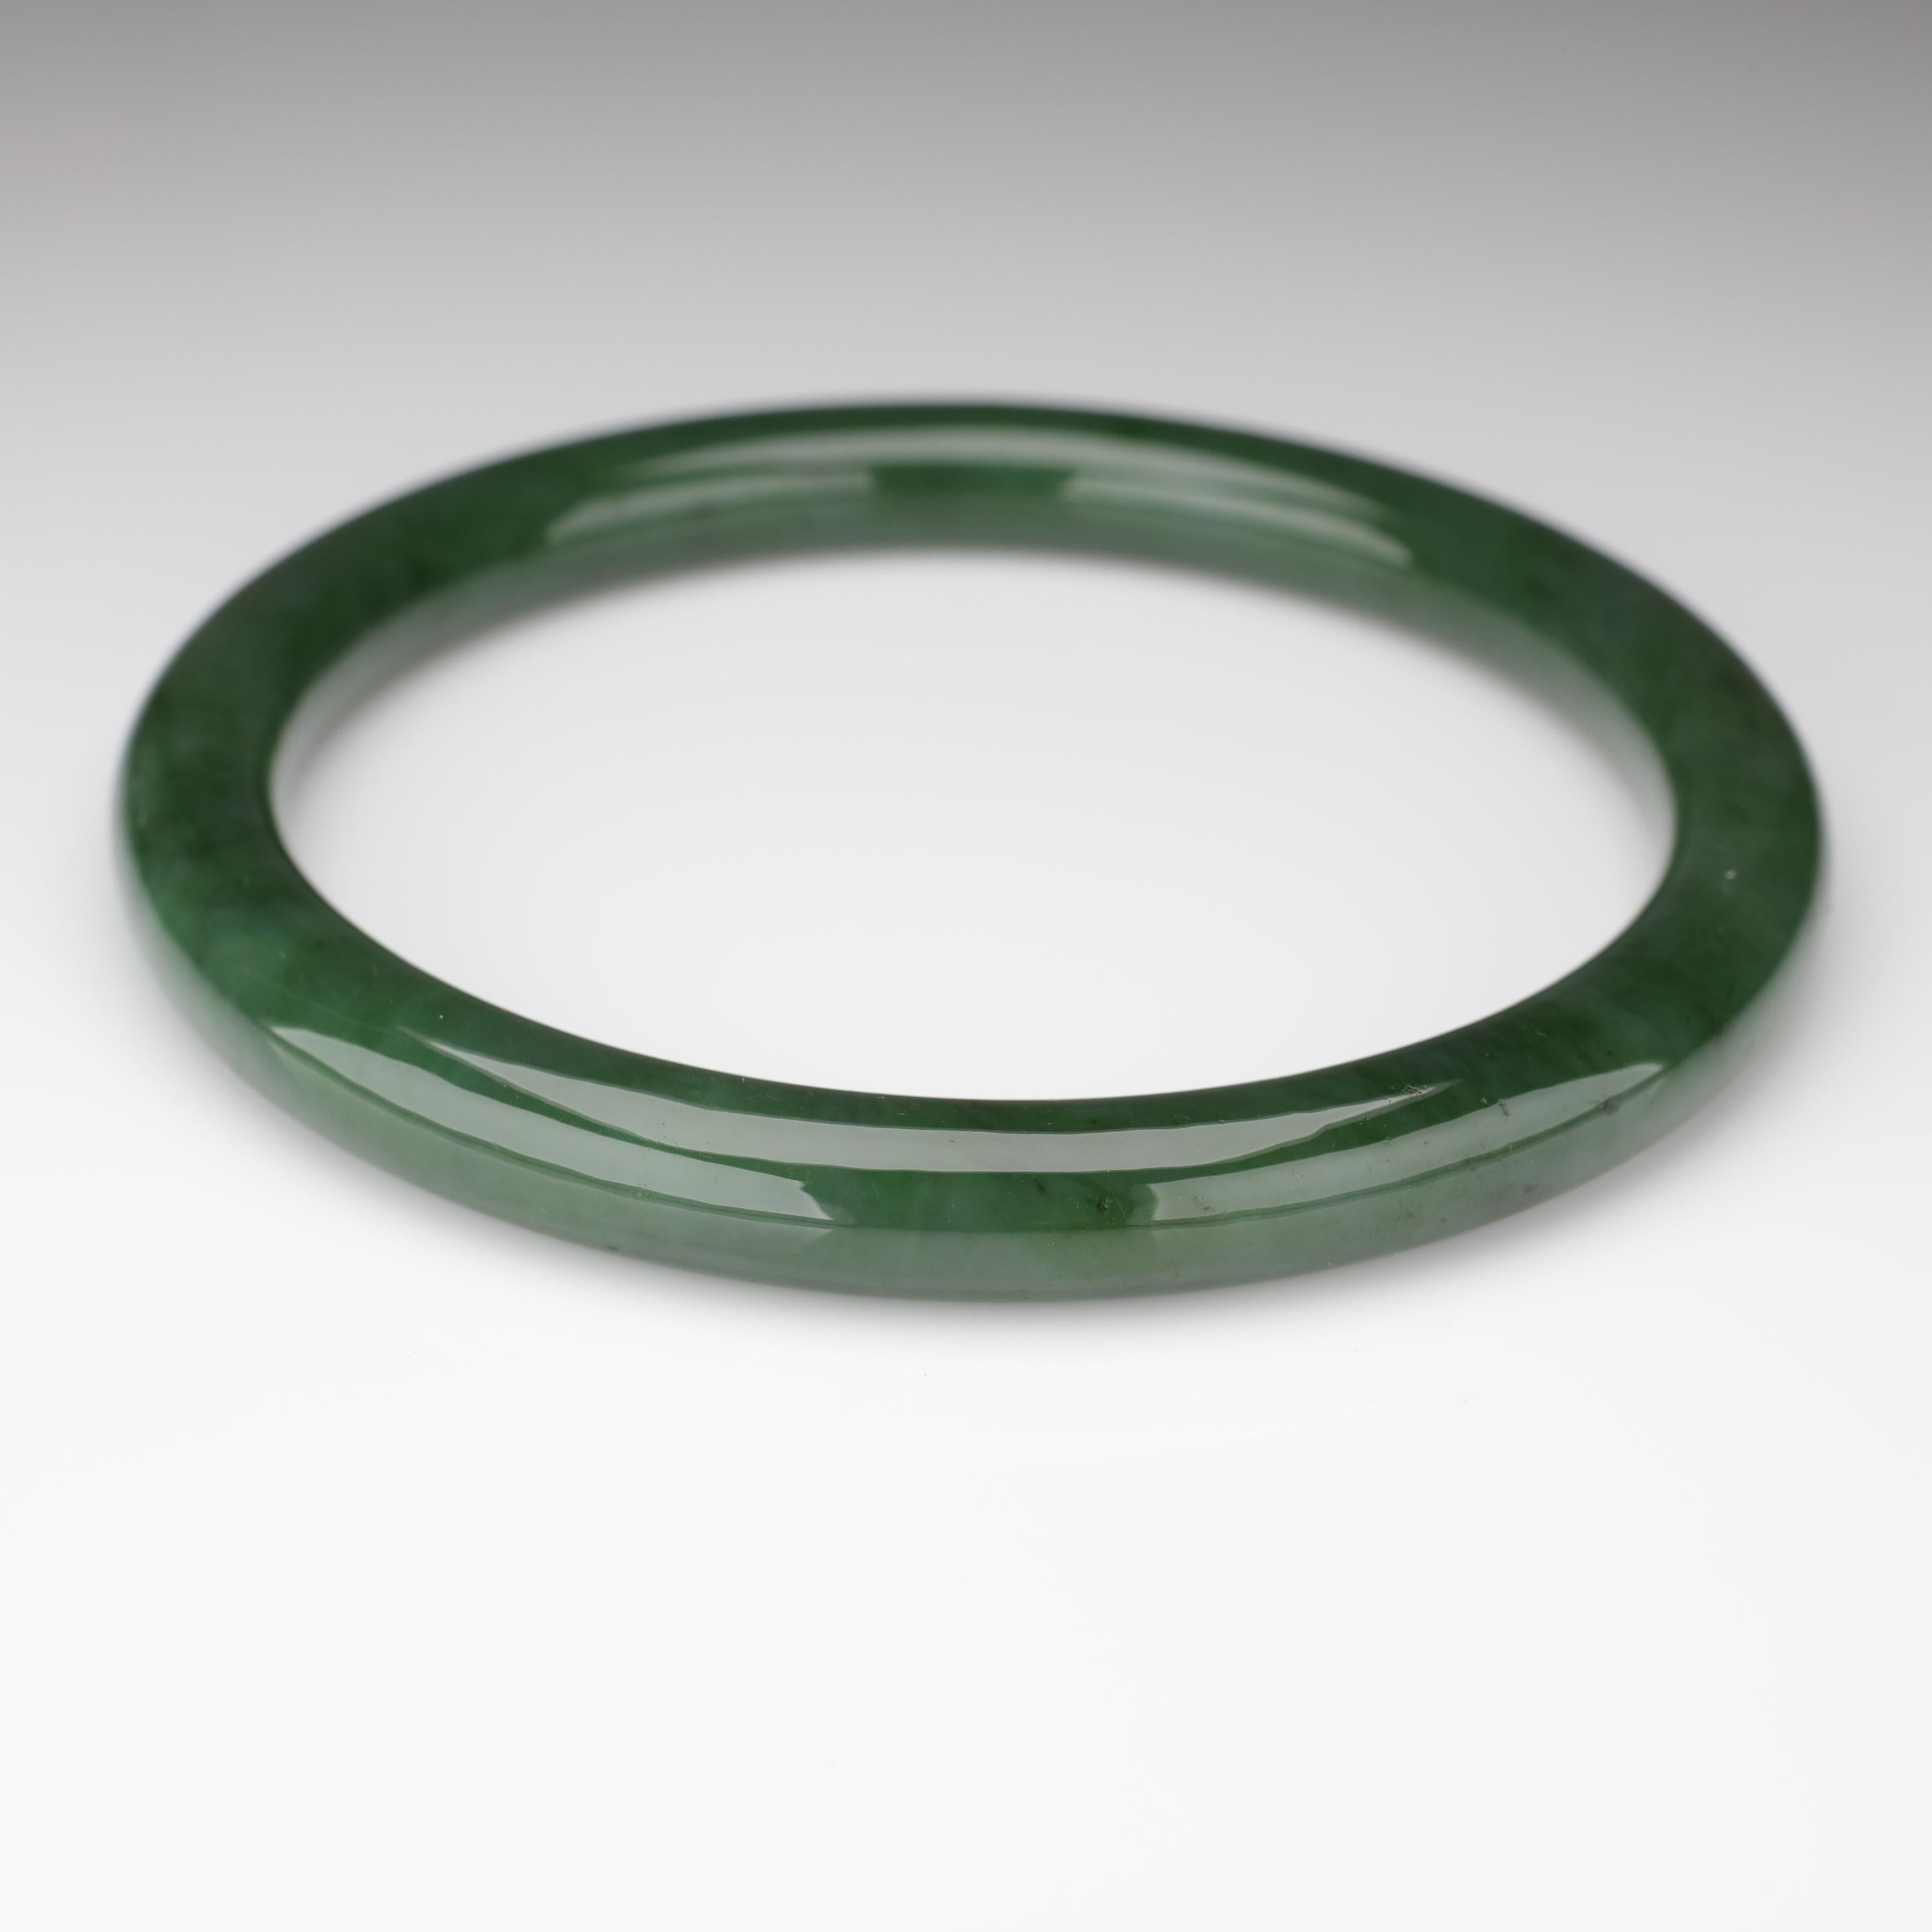 jade bangles meaning